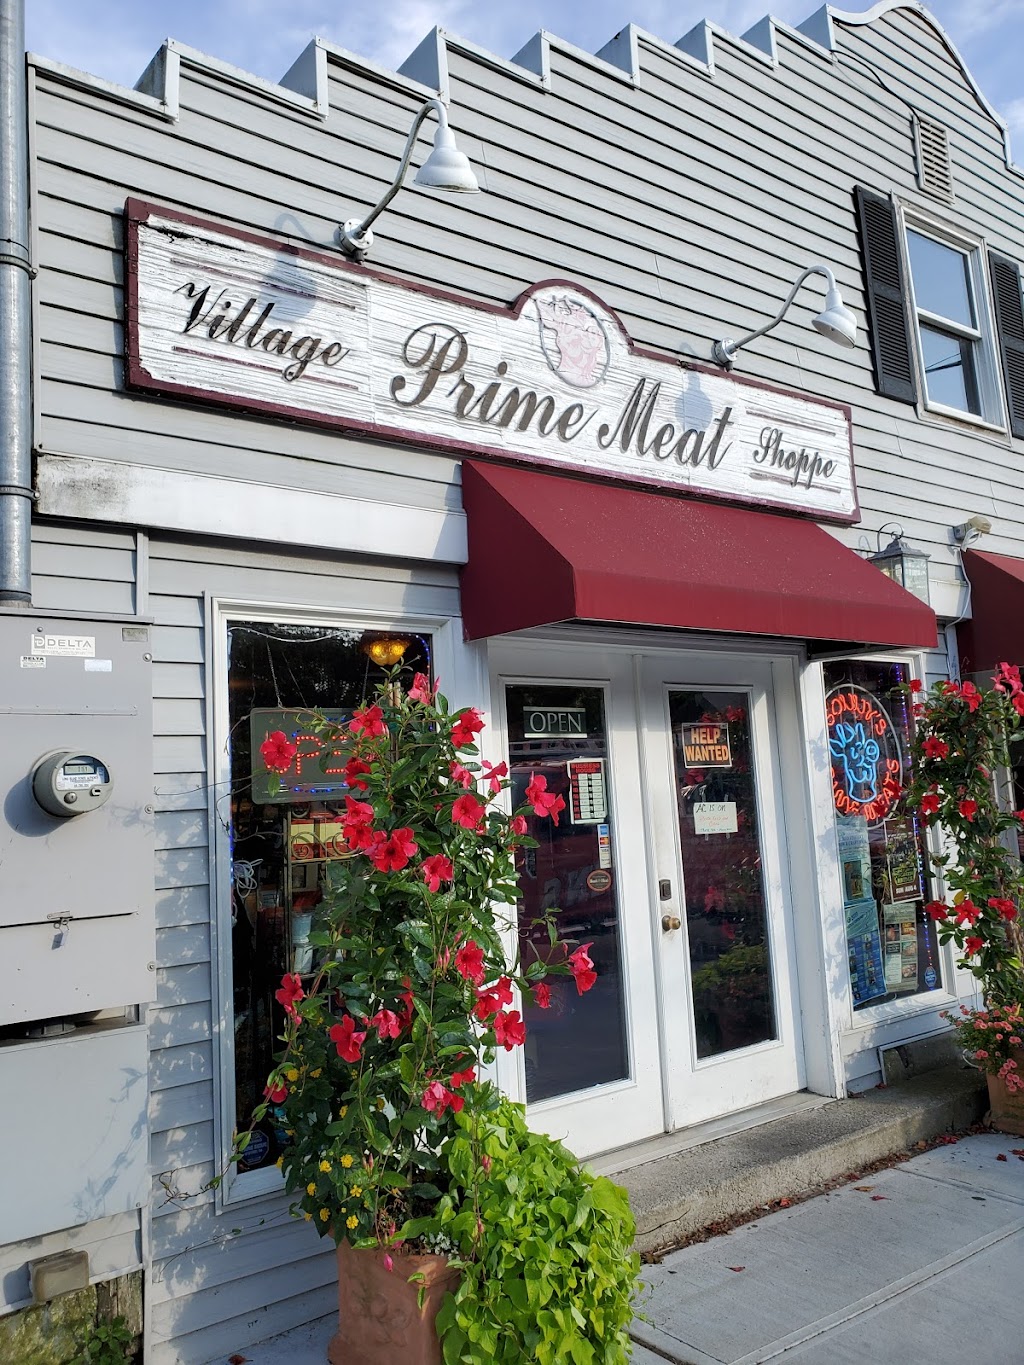 Village Prime Meat Shoppe | 495 Montauk Hwy, East Quogue, NY 11942 | Phone: (631) 653-8071